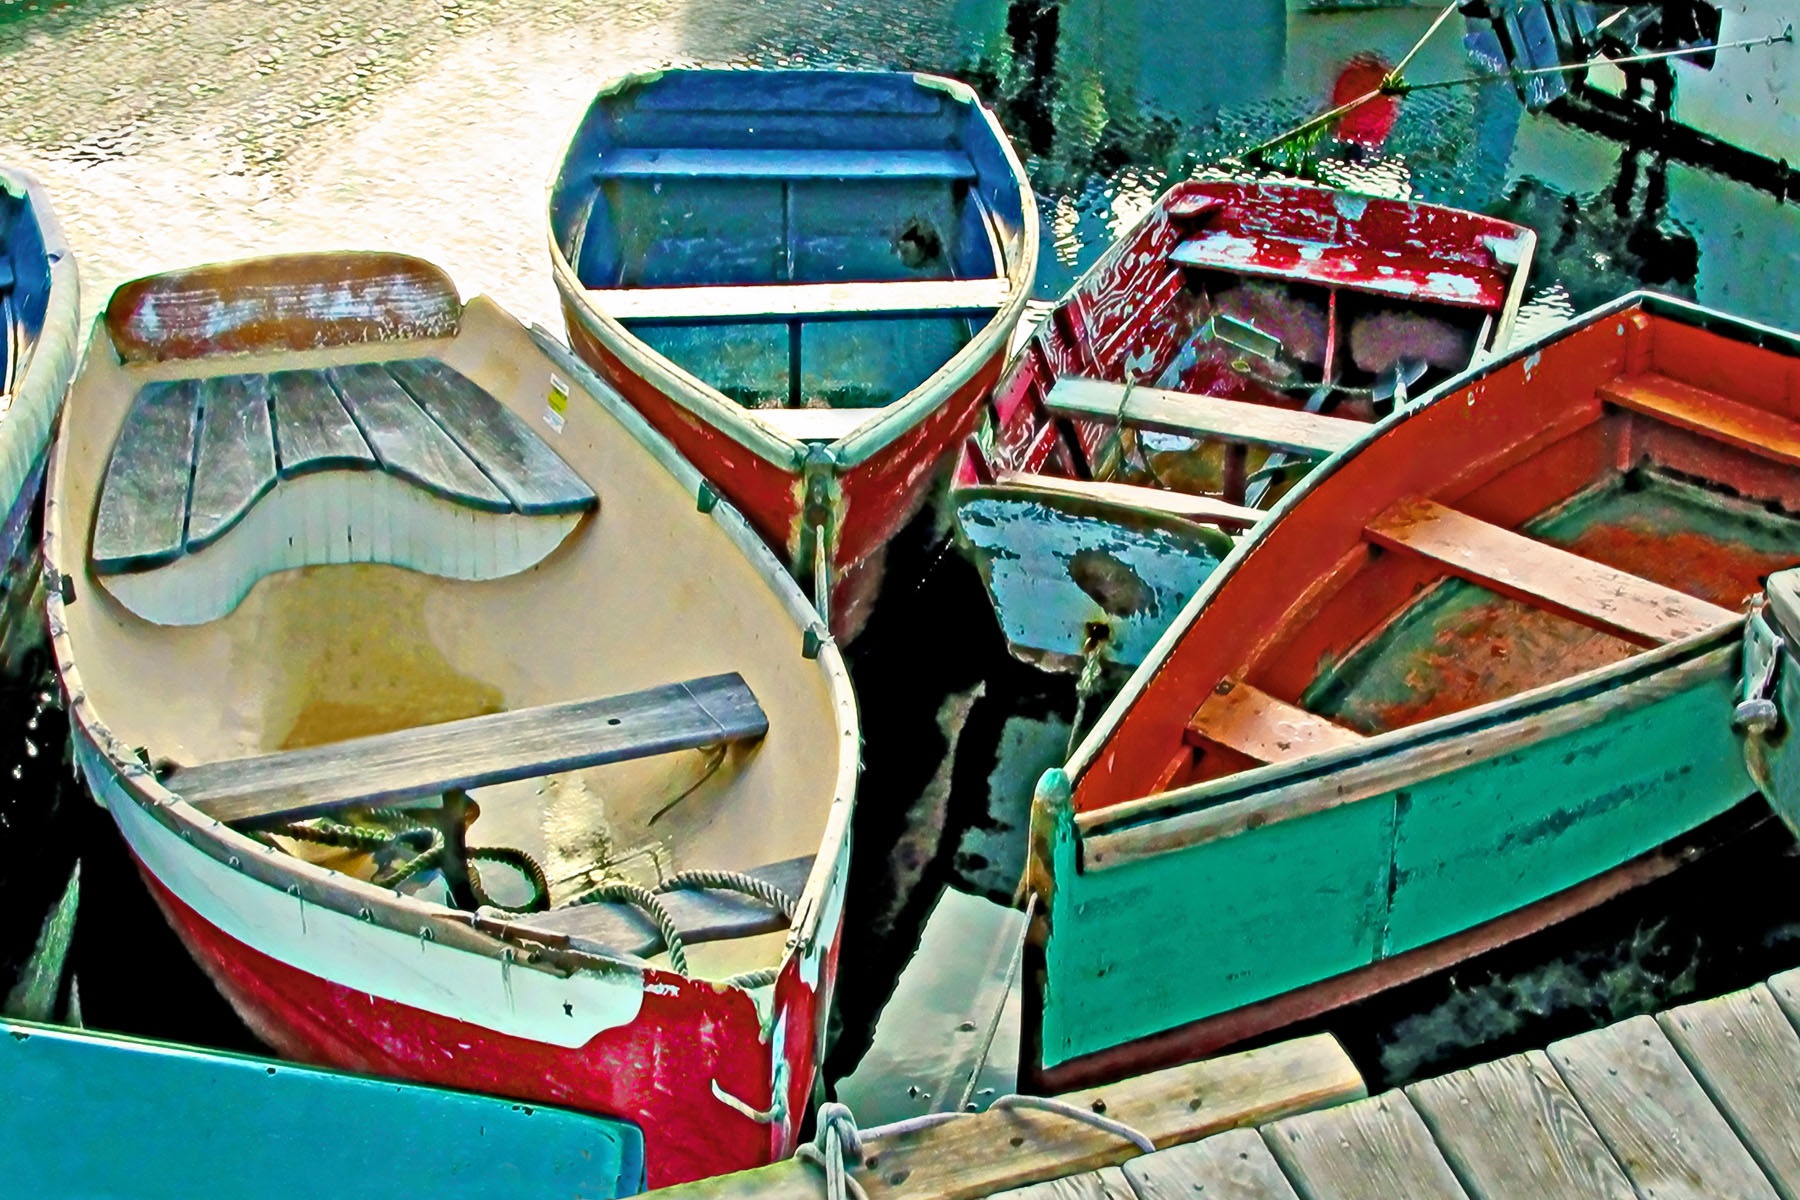 BOATS - Taken in a small harbor town in Massachusetts. I suppose the correct term could be "dinghys", but I call 'em "BOATS".